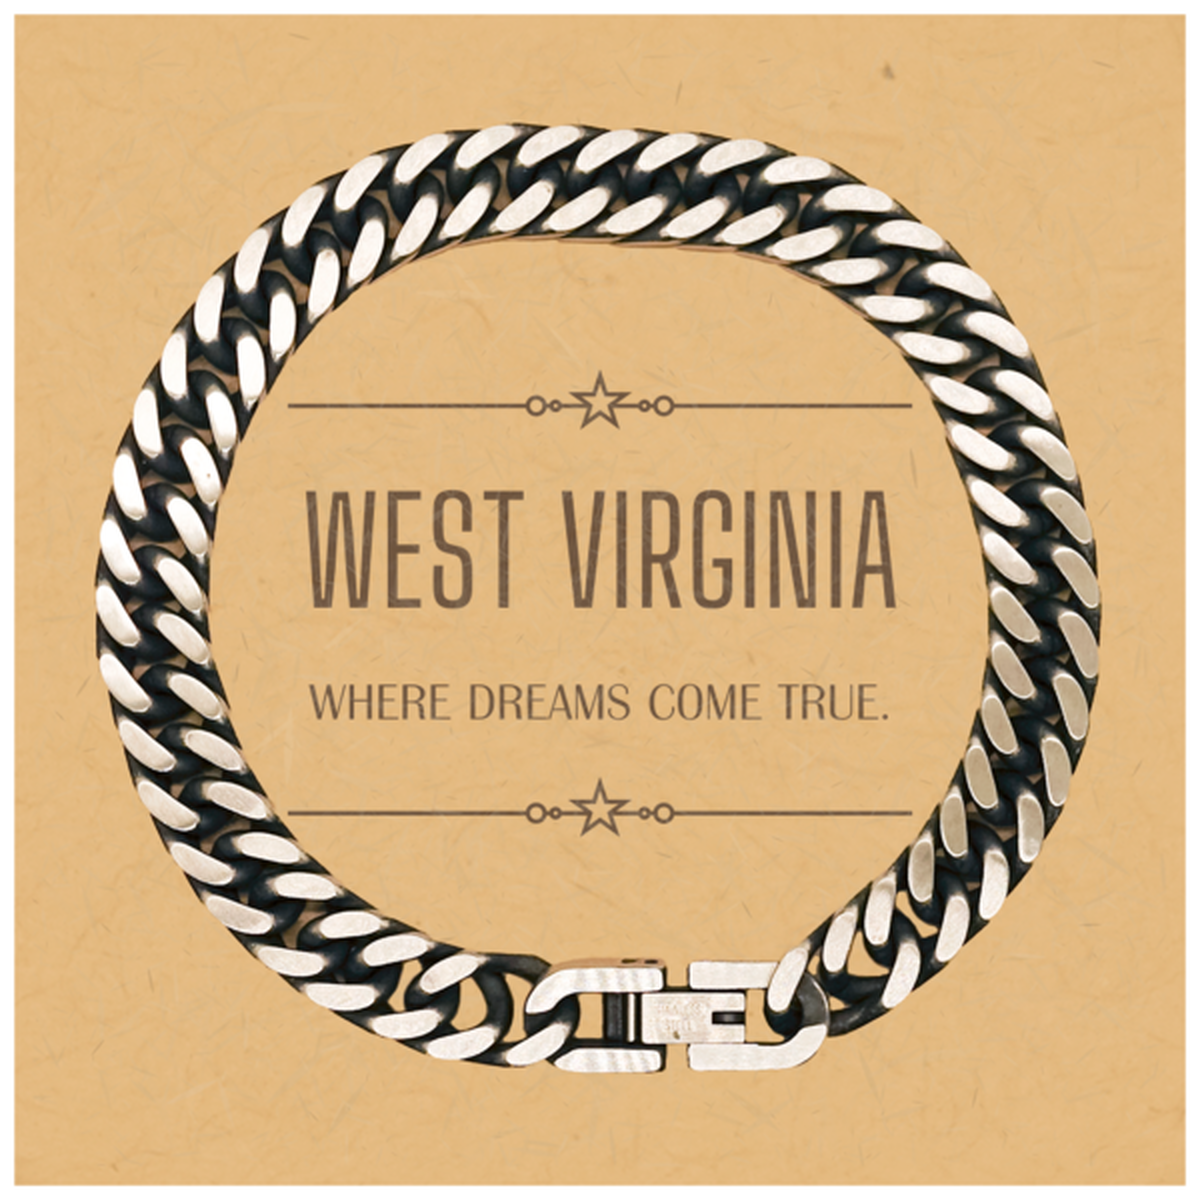 Love West Virginia State Cuban Link Chain Bracelet, West Virginia Where dreams come true, Birthday Christmas Inspirational Gifts For West Virginia Men, Women, Friends